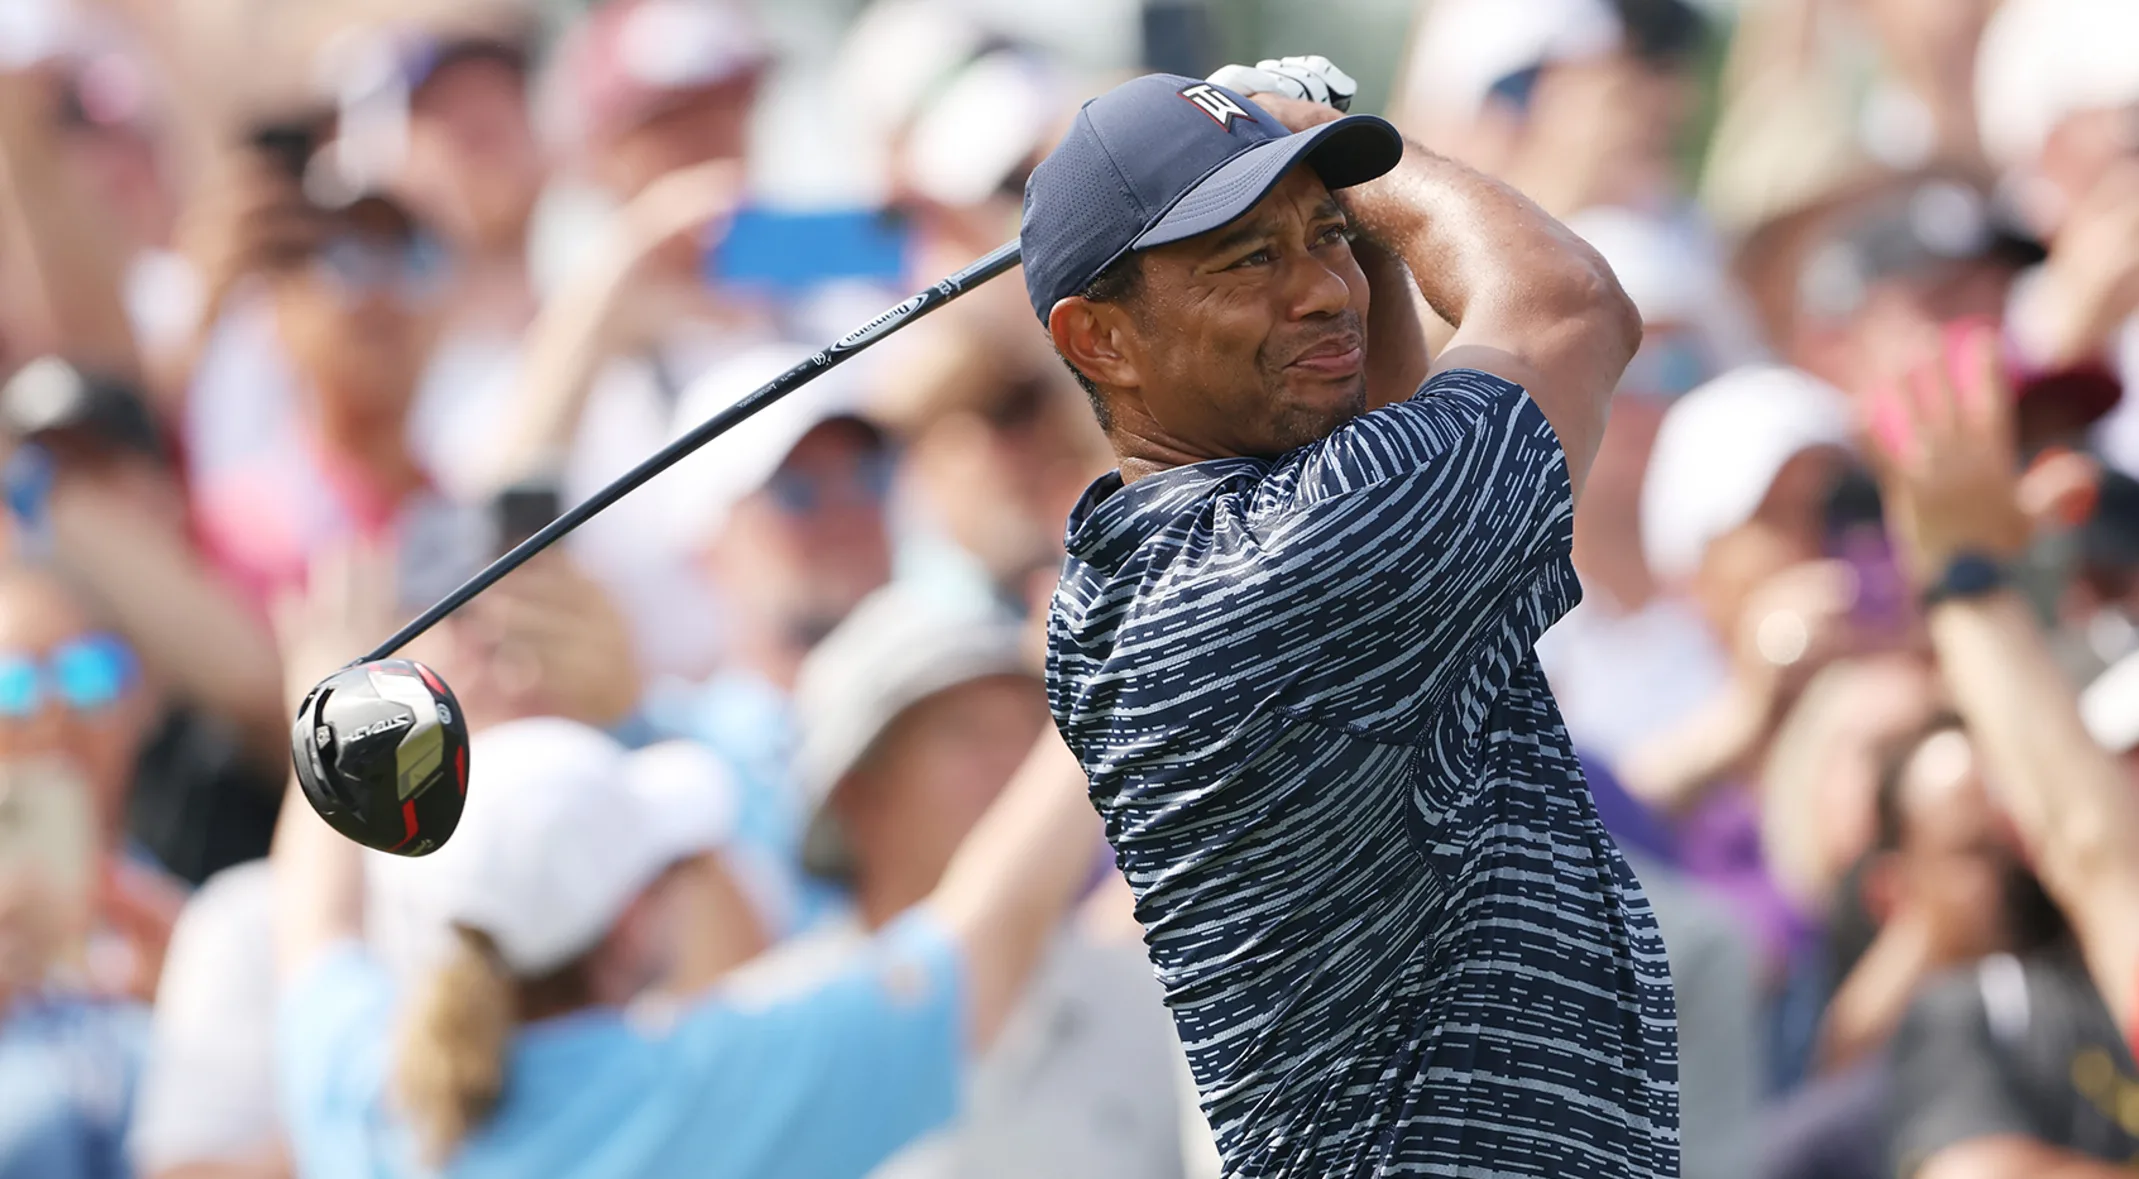 The Open 2022 LIVE: Latest scores and competitor list as Rory McIlroy underway with Tiger Woods later